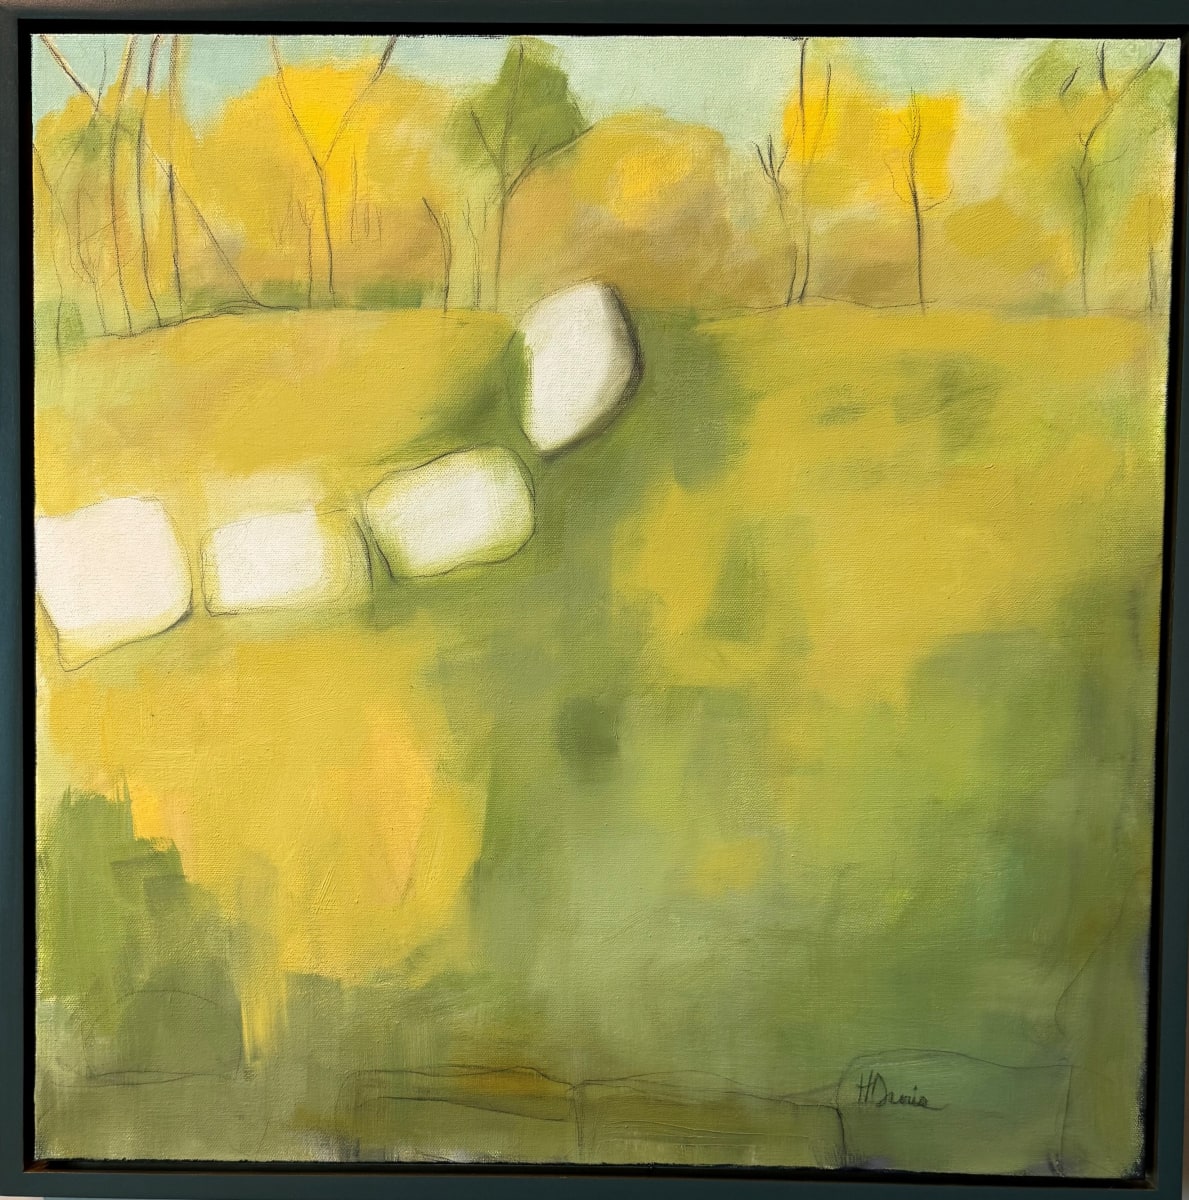 Autumn Outside My Studio Window by Heather Duris  Image: Abstracted landscape in oil